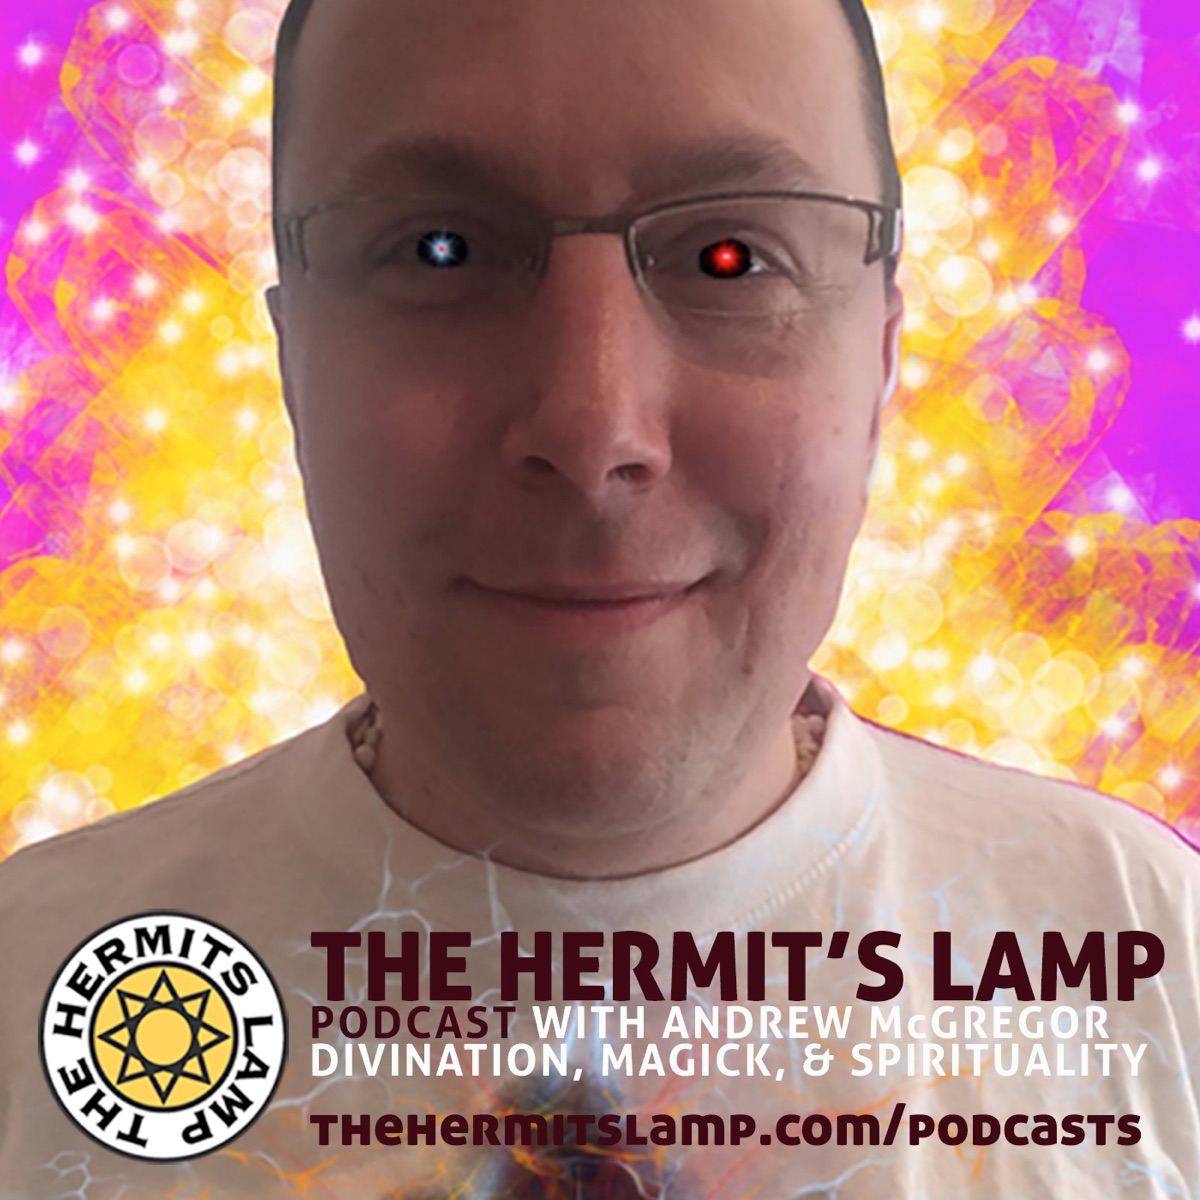 The Hermit's Lamp Podcast   A place for witches, hermits, mystics